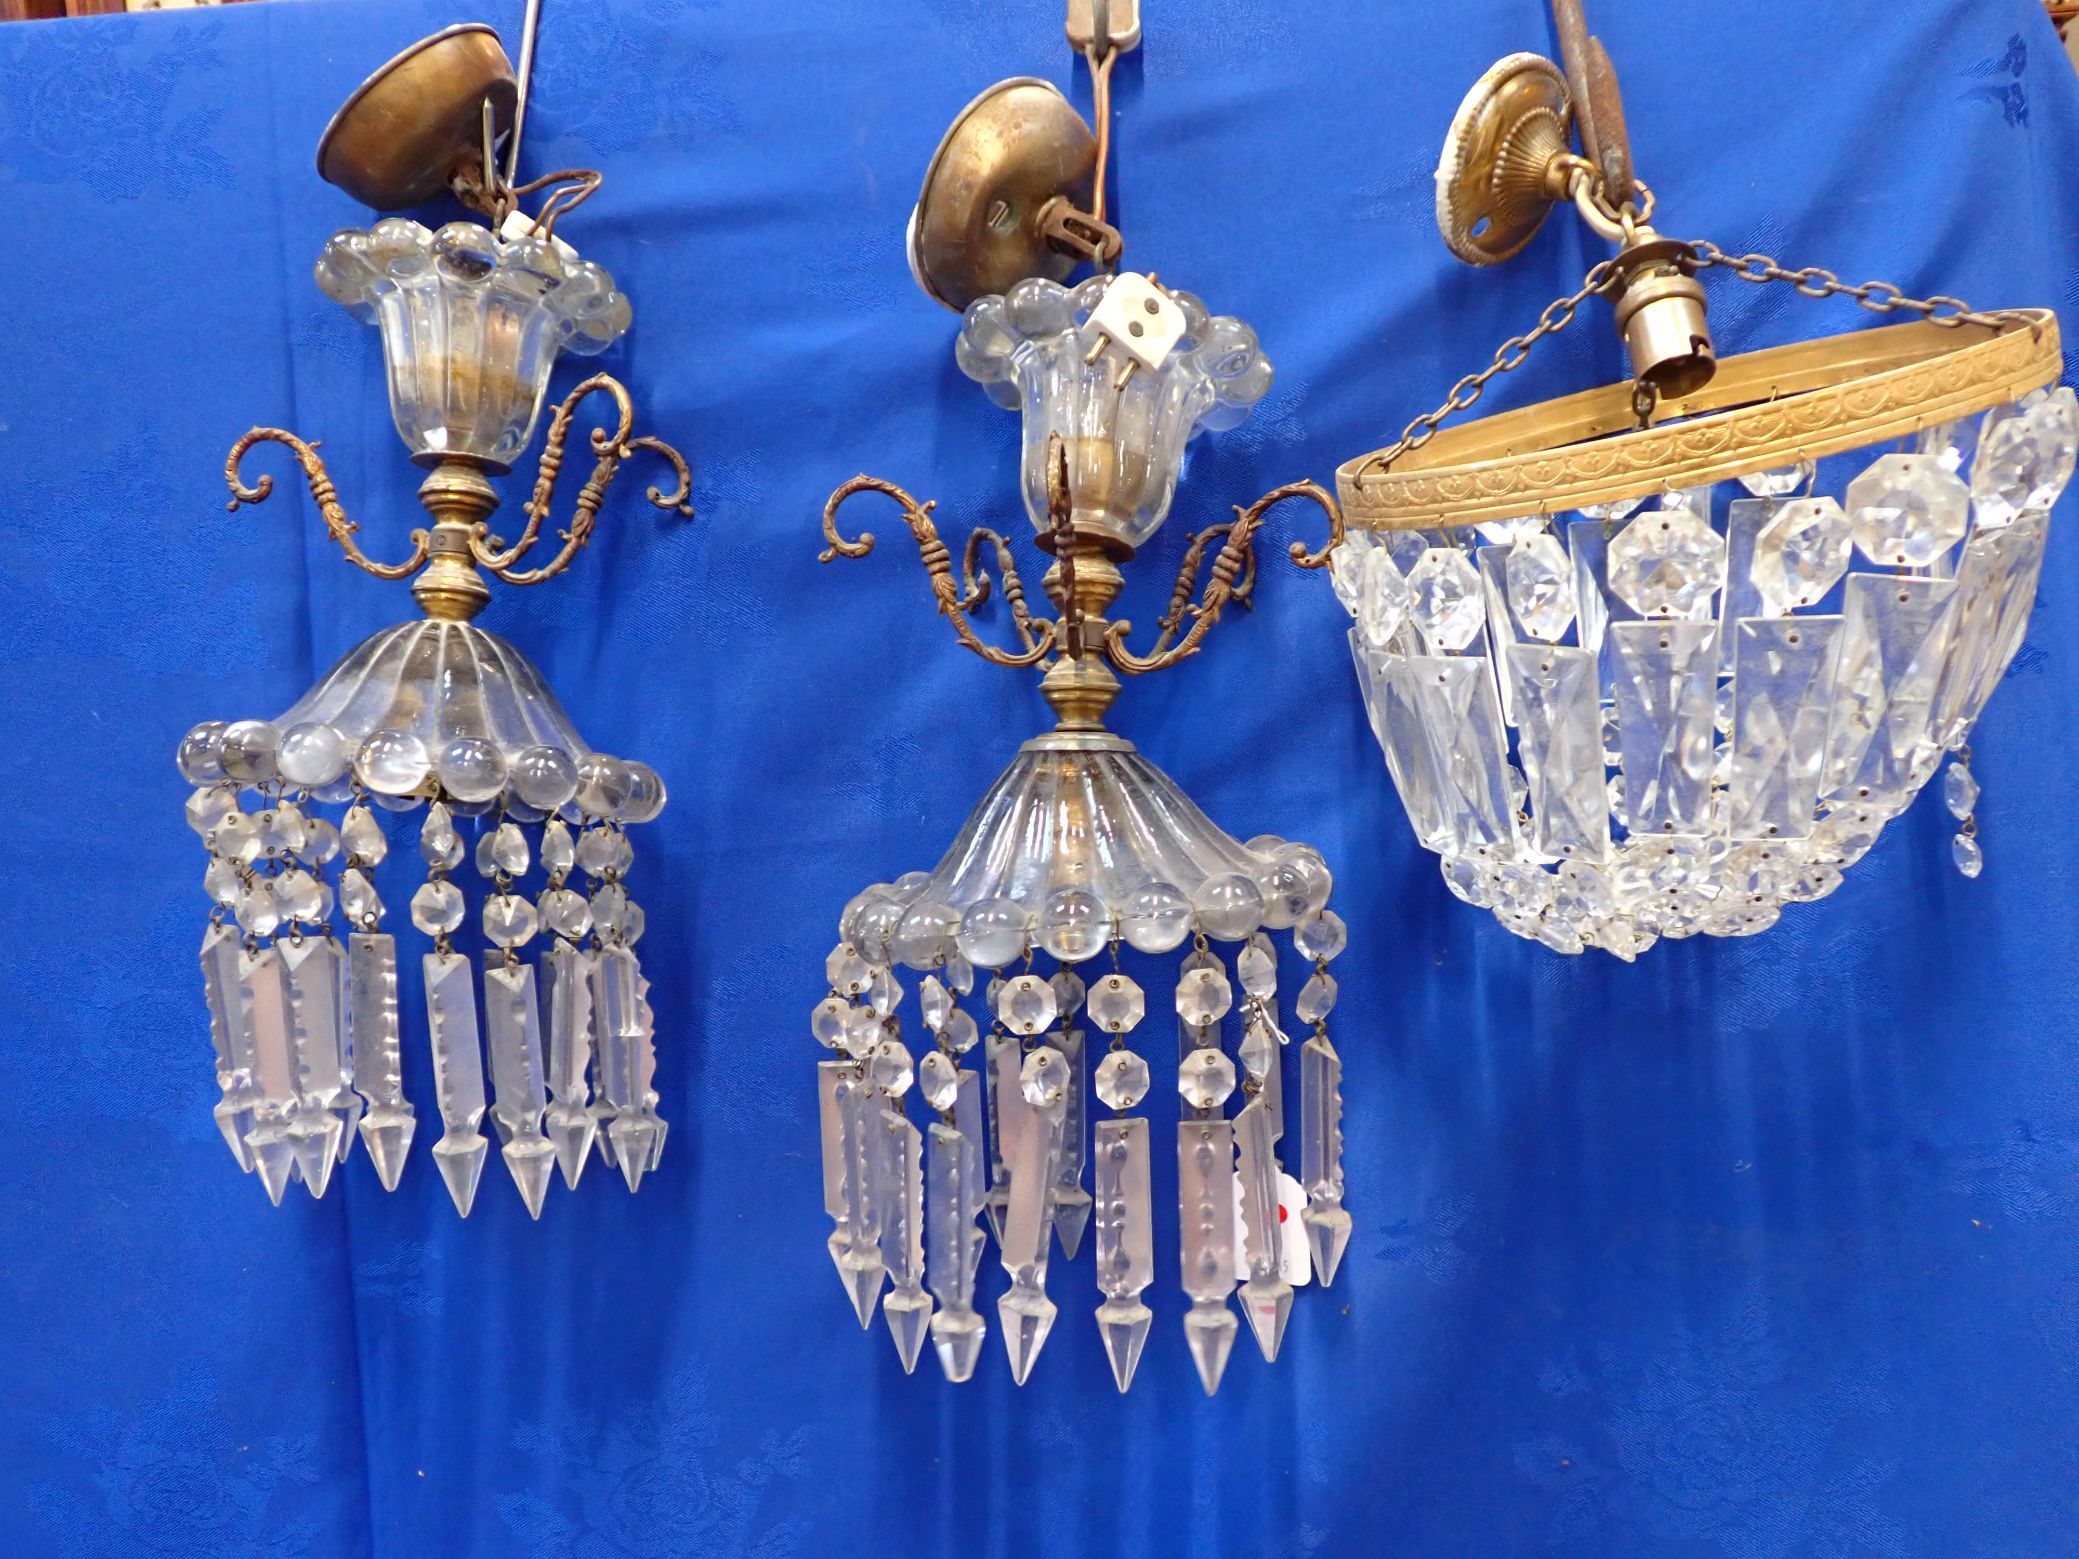 A PAIR OF EDWARDIAN STYLE SMALL CHANDELIERS